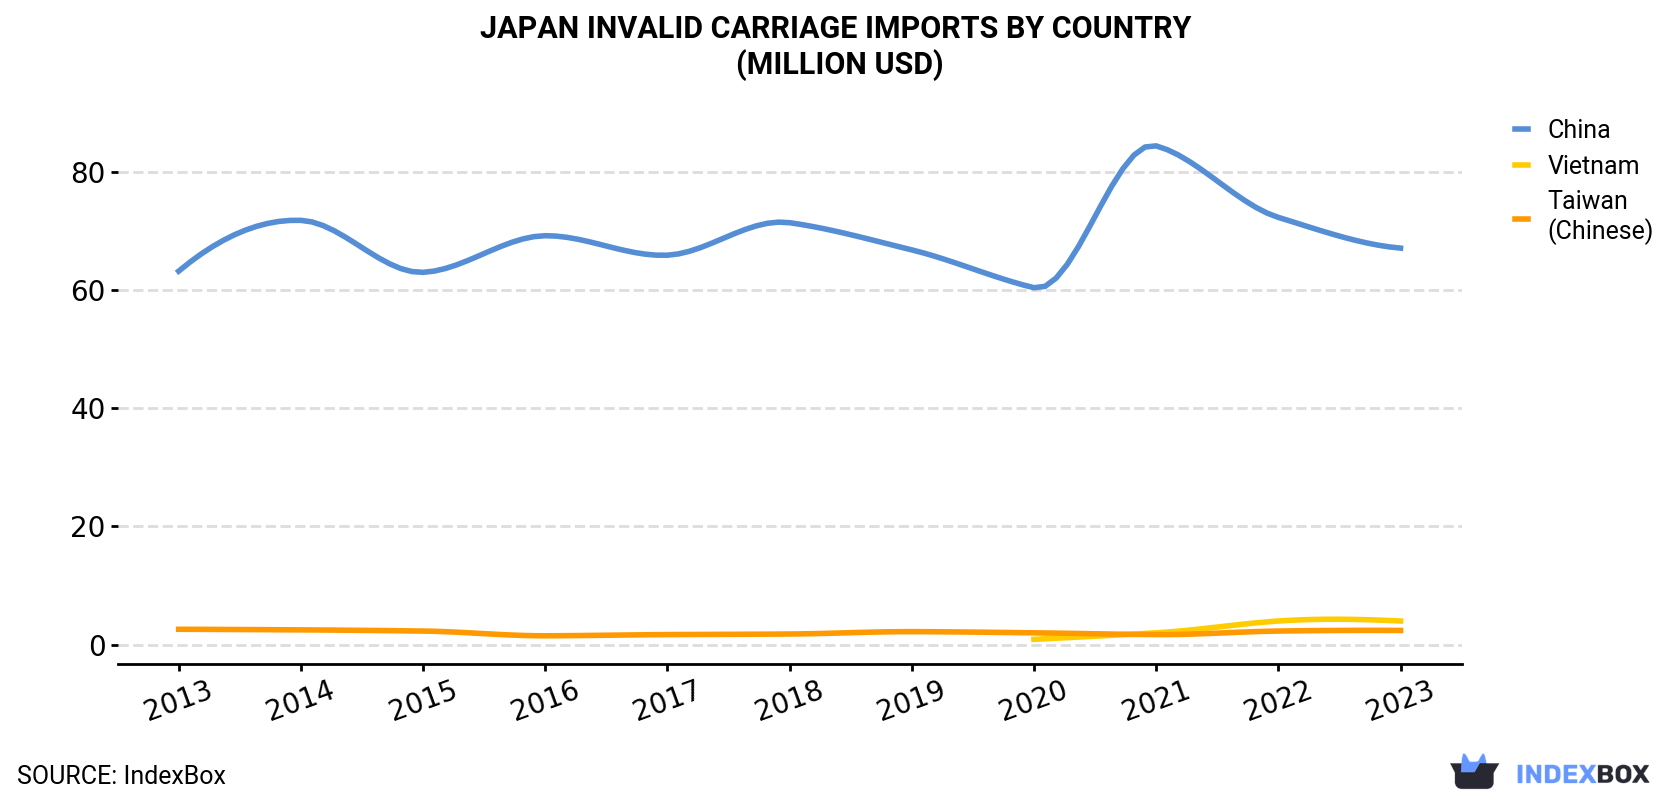 Japan Invalid Carriage Imports By Country (Million USD)